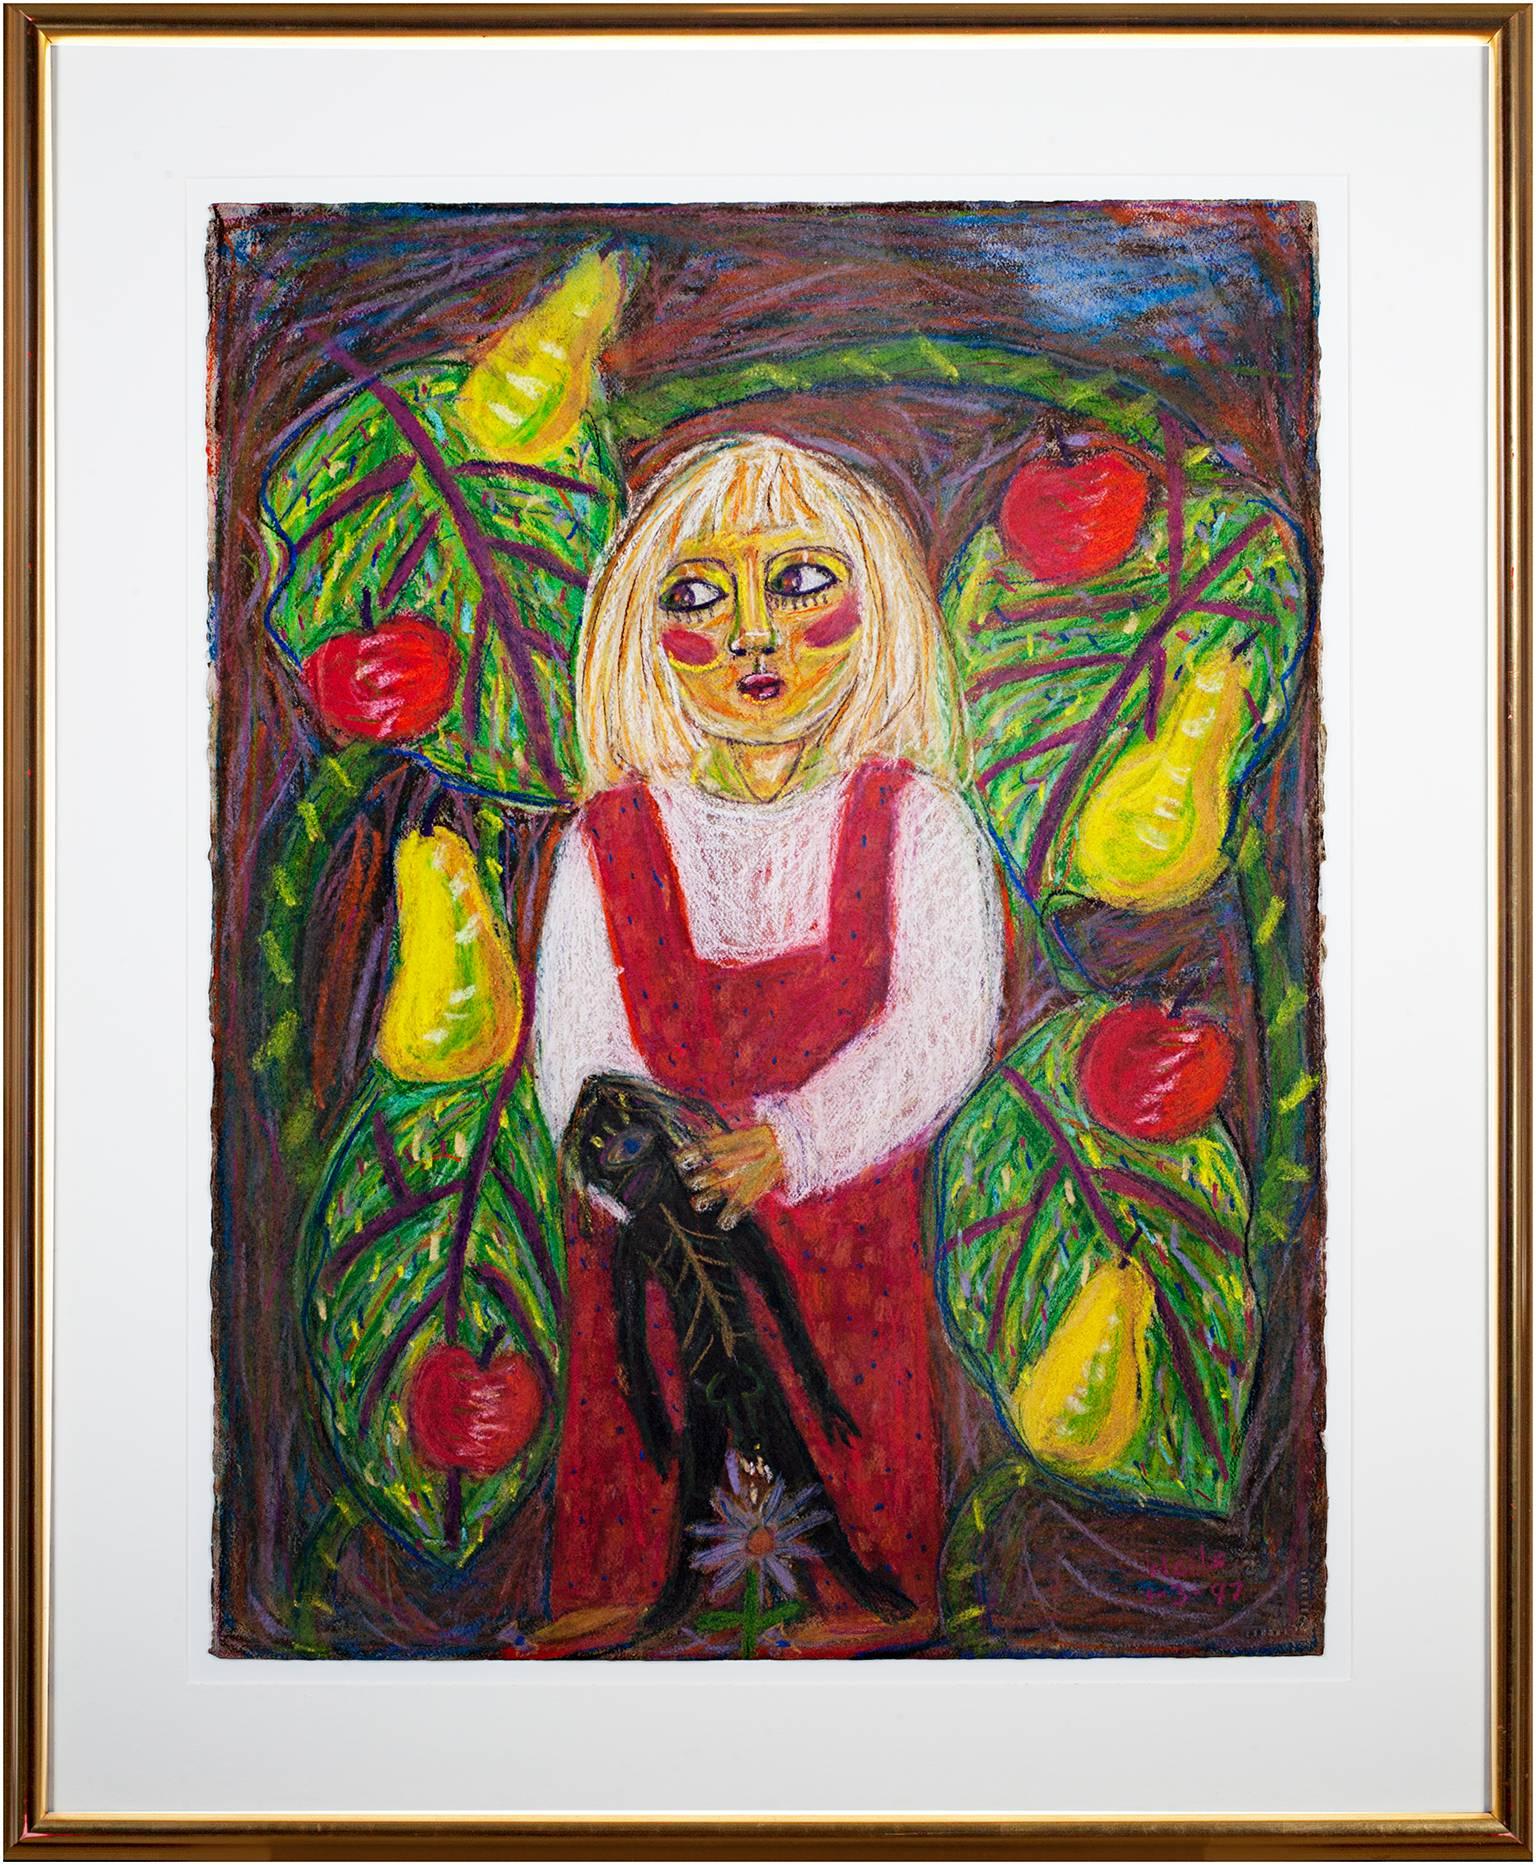 "America, How Does Your Garden Grow?' is an original pastel by Della Wells. It pictures a blond girl holding a black doll in a verdant garden-like setting with leaves and apples and pears. The vines appear to be serpent-like, and the girl's